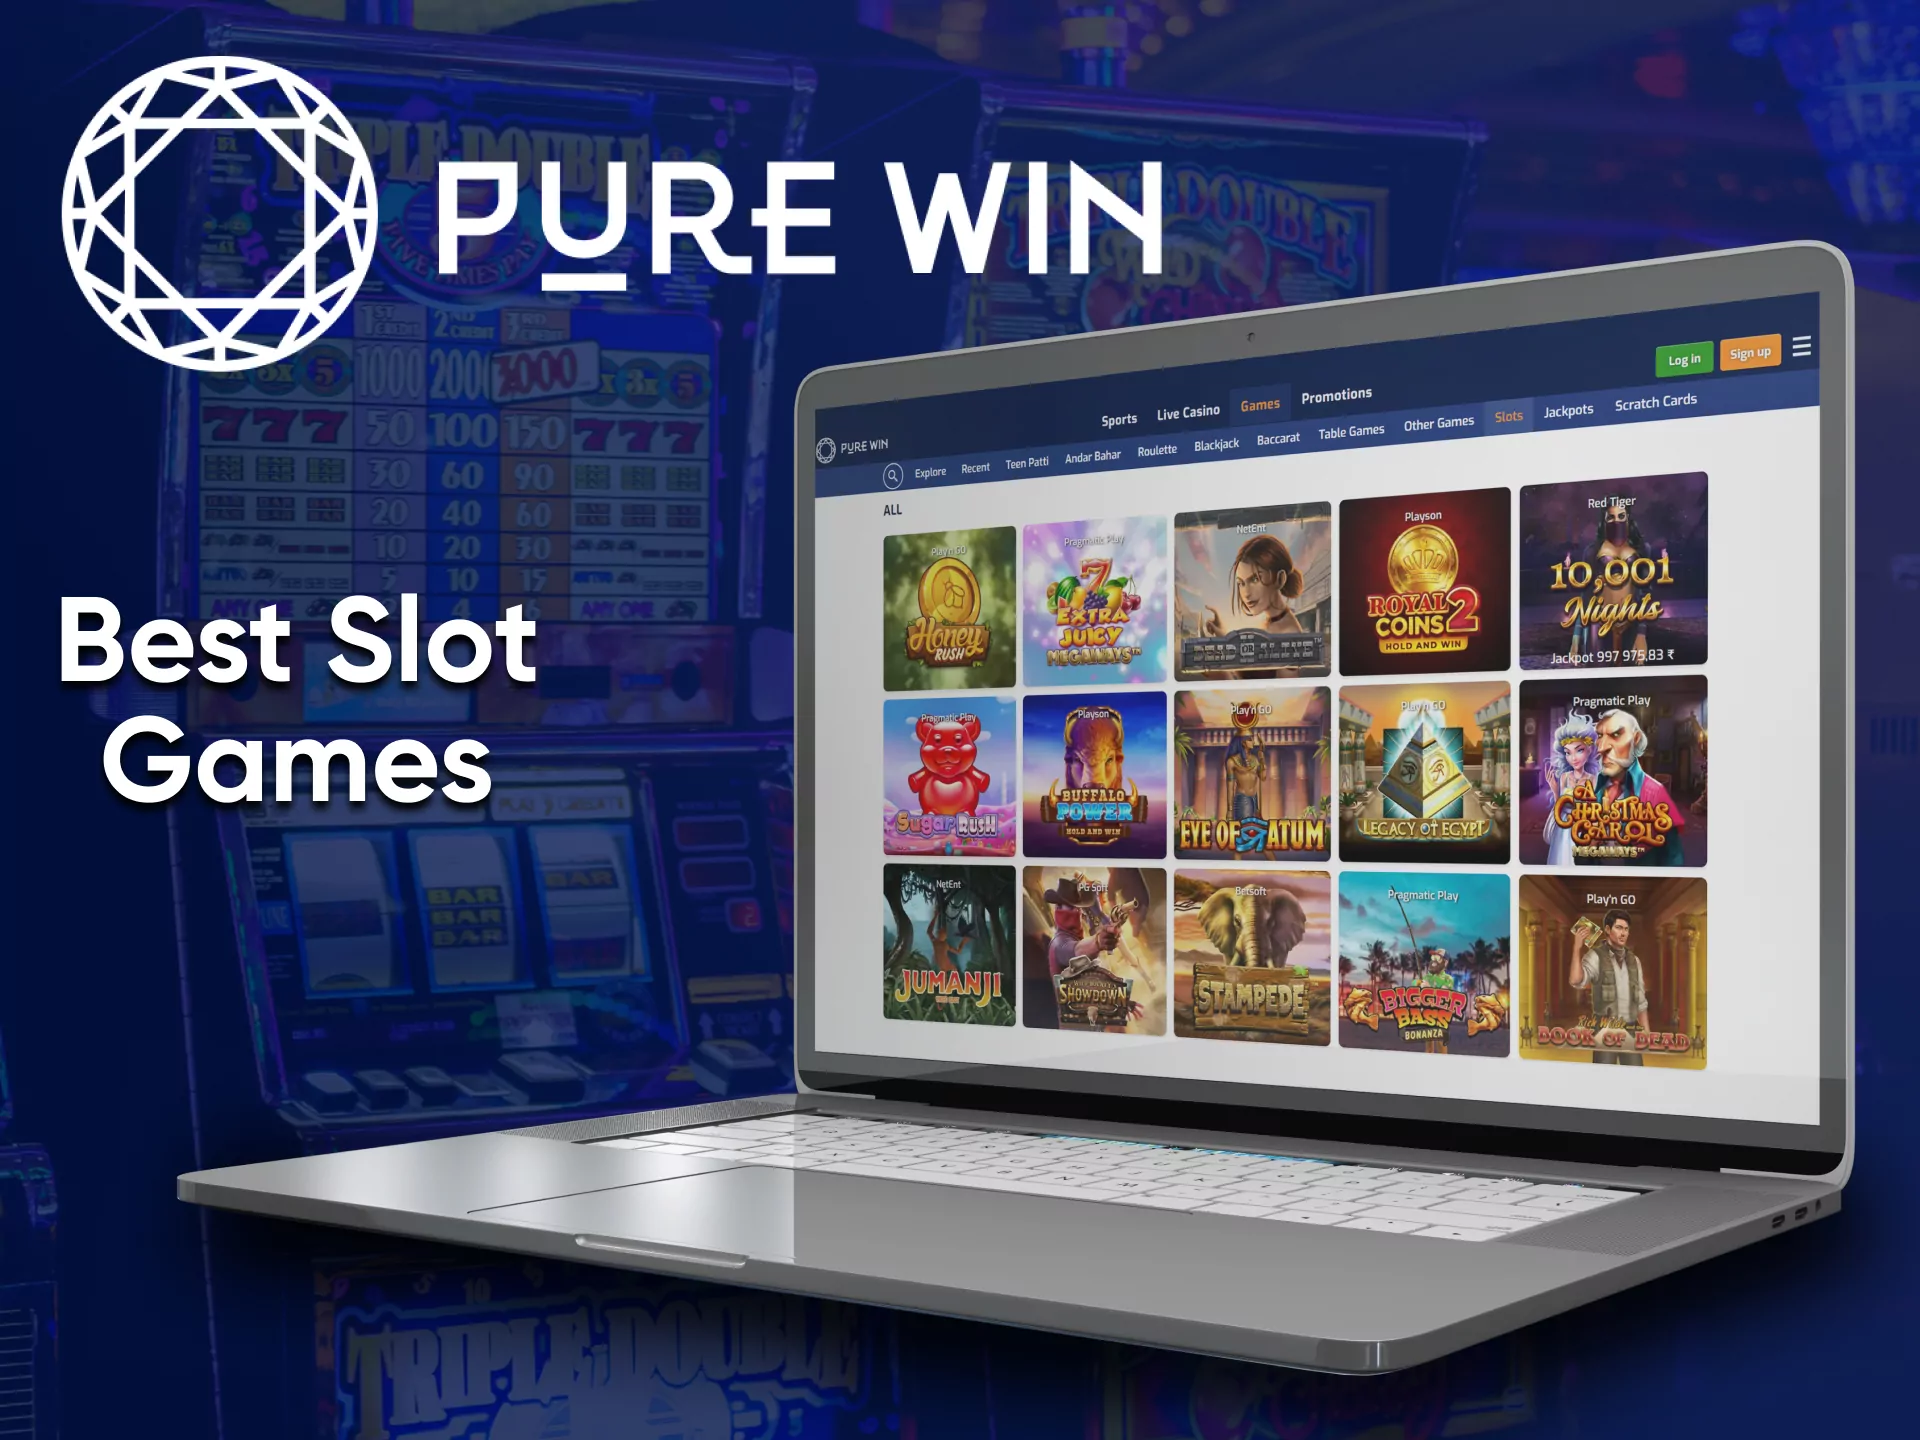 Play Slots in the section from Pure Win.